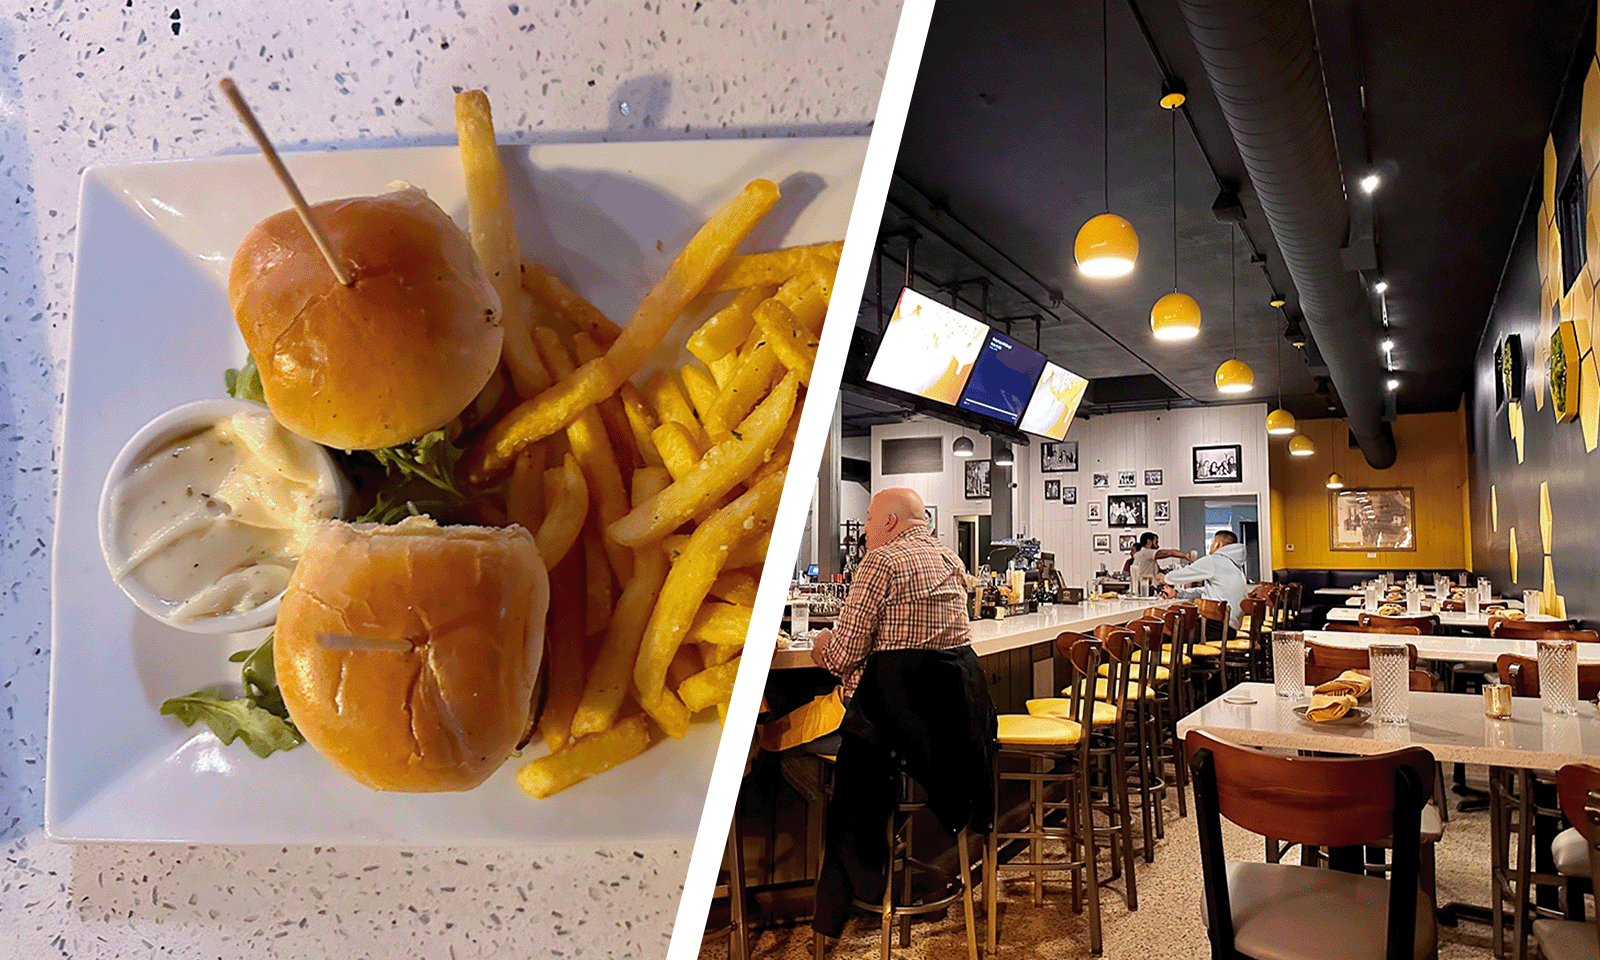 two images with burger sliders and inside of restaurant with bar and tables